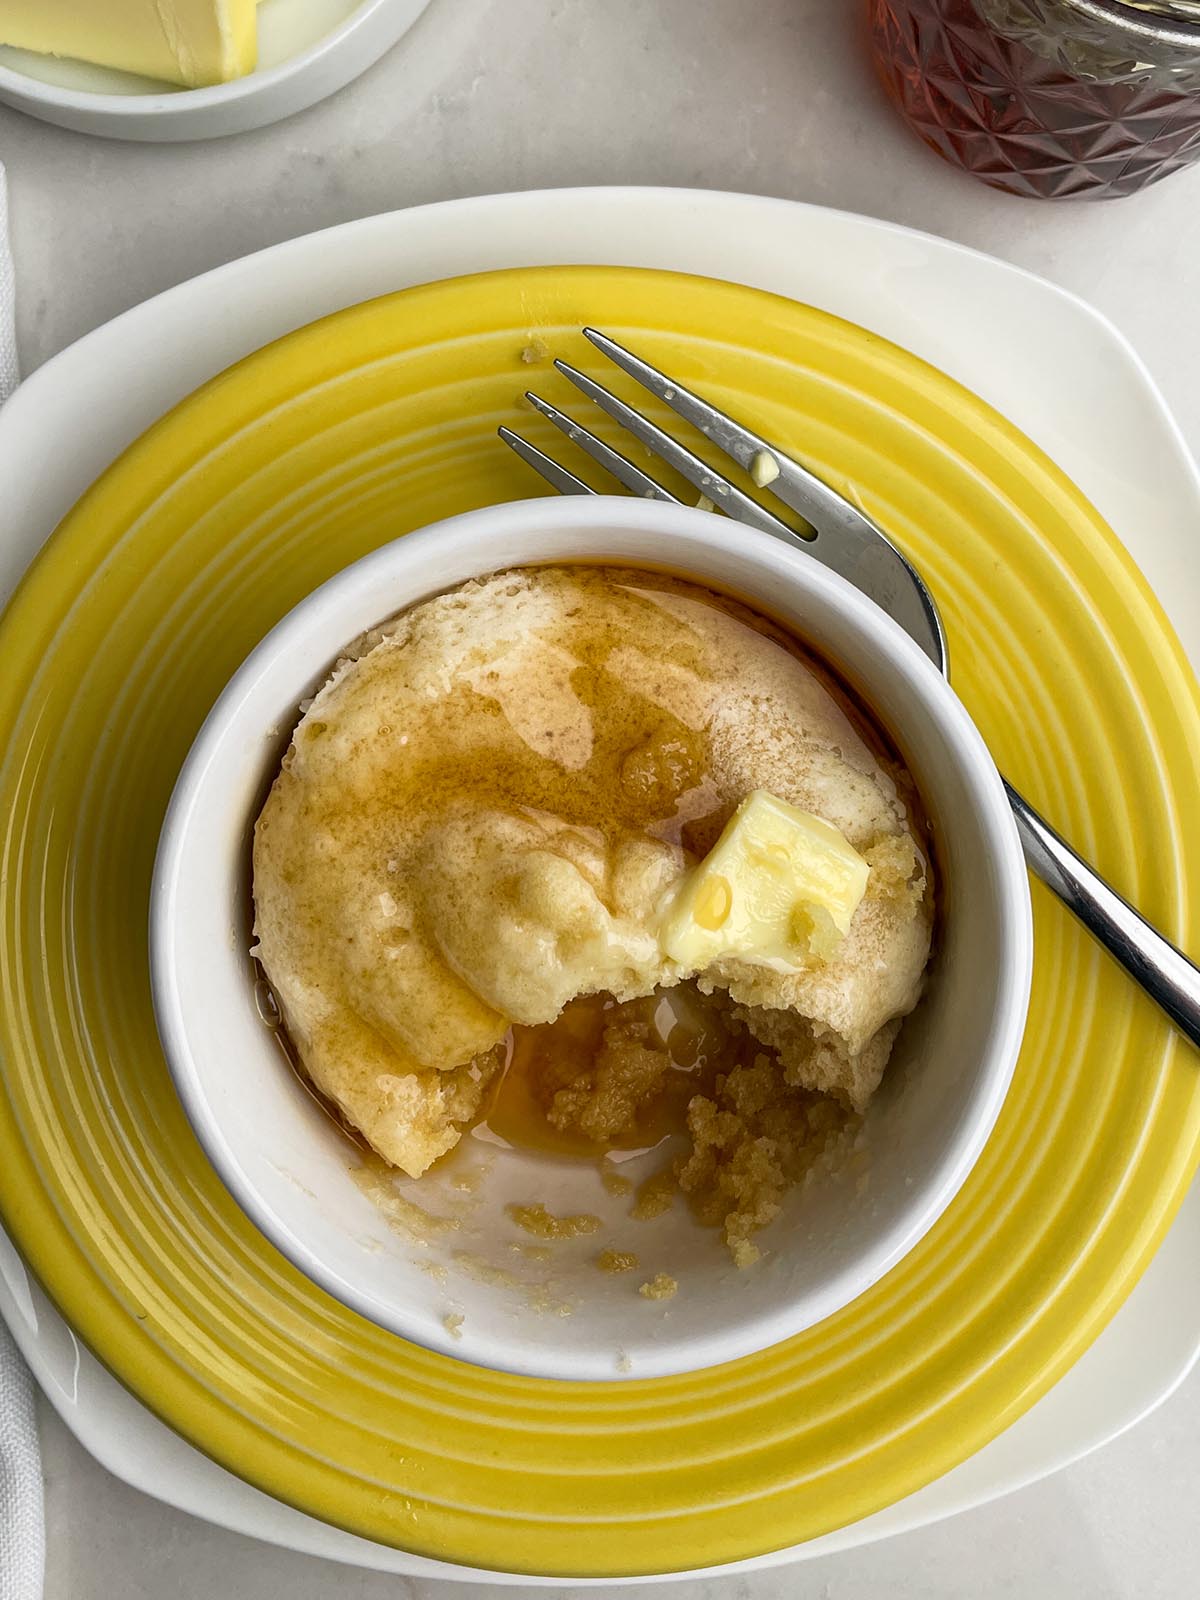 Bisquick pancake in a white mug with butter and syrup on a yellow plate